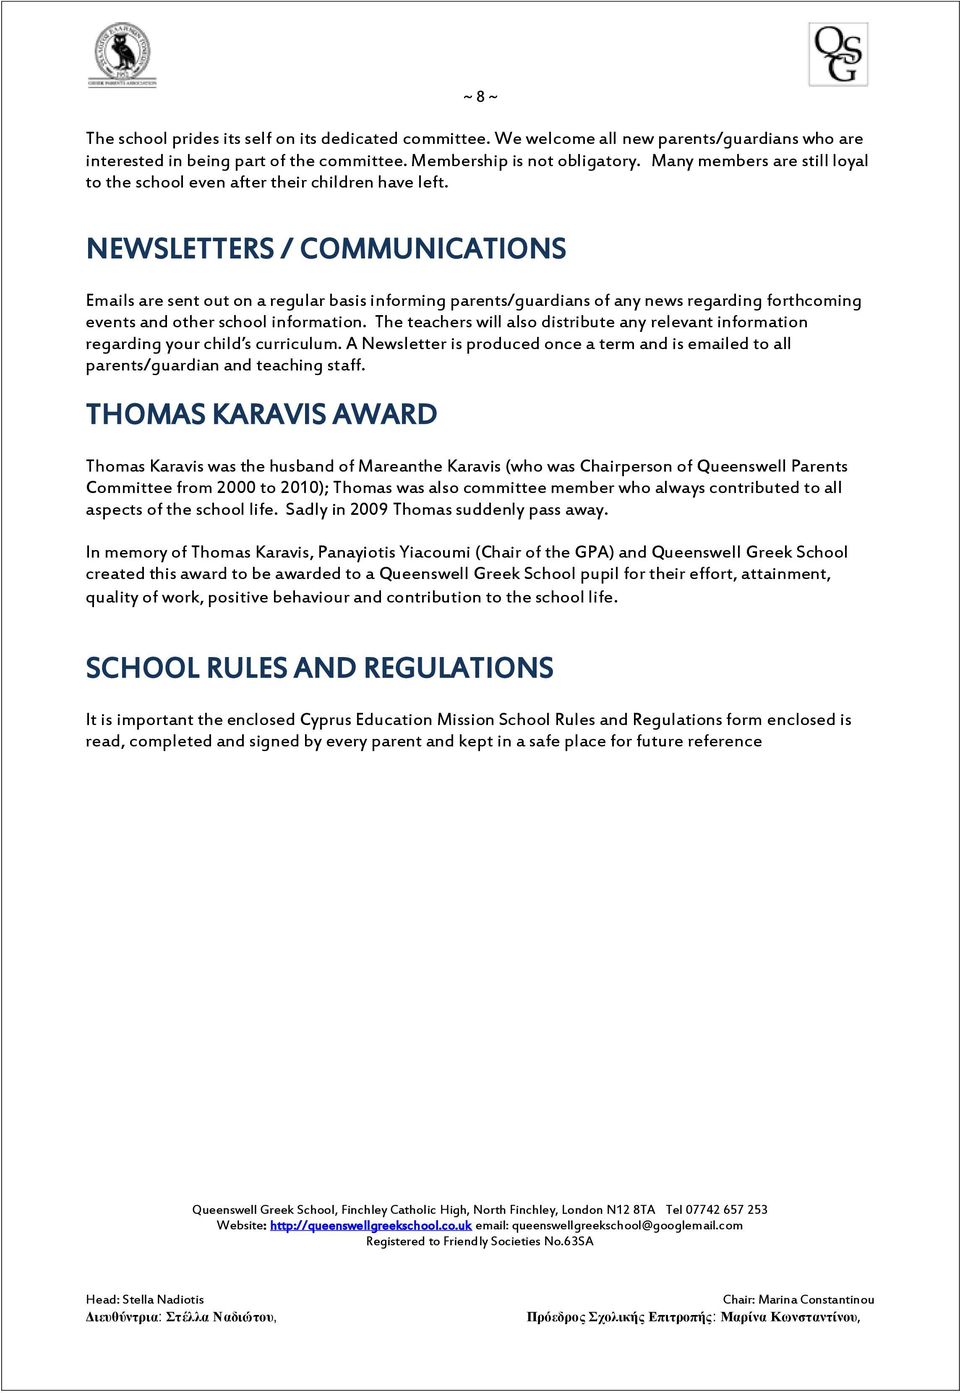 NEWSLETTERS / COMMUNICATIONS Emails are sent out on a regular basis informing parents/guardians of any news regarding forthcoming events and other school information.